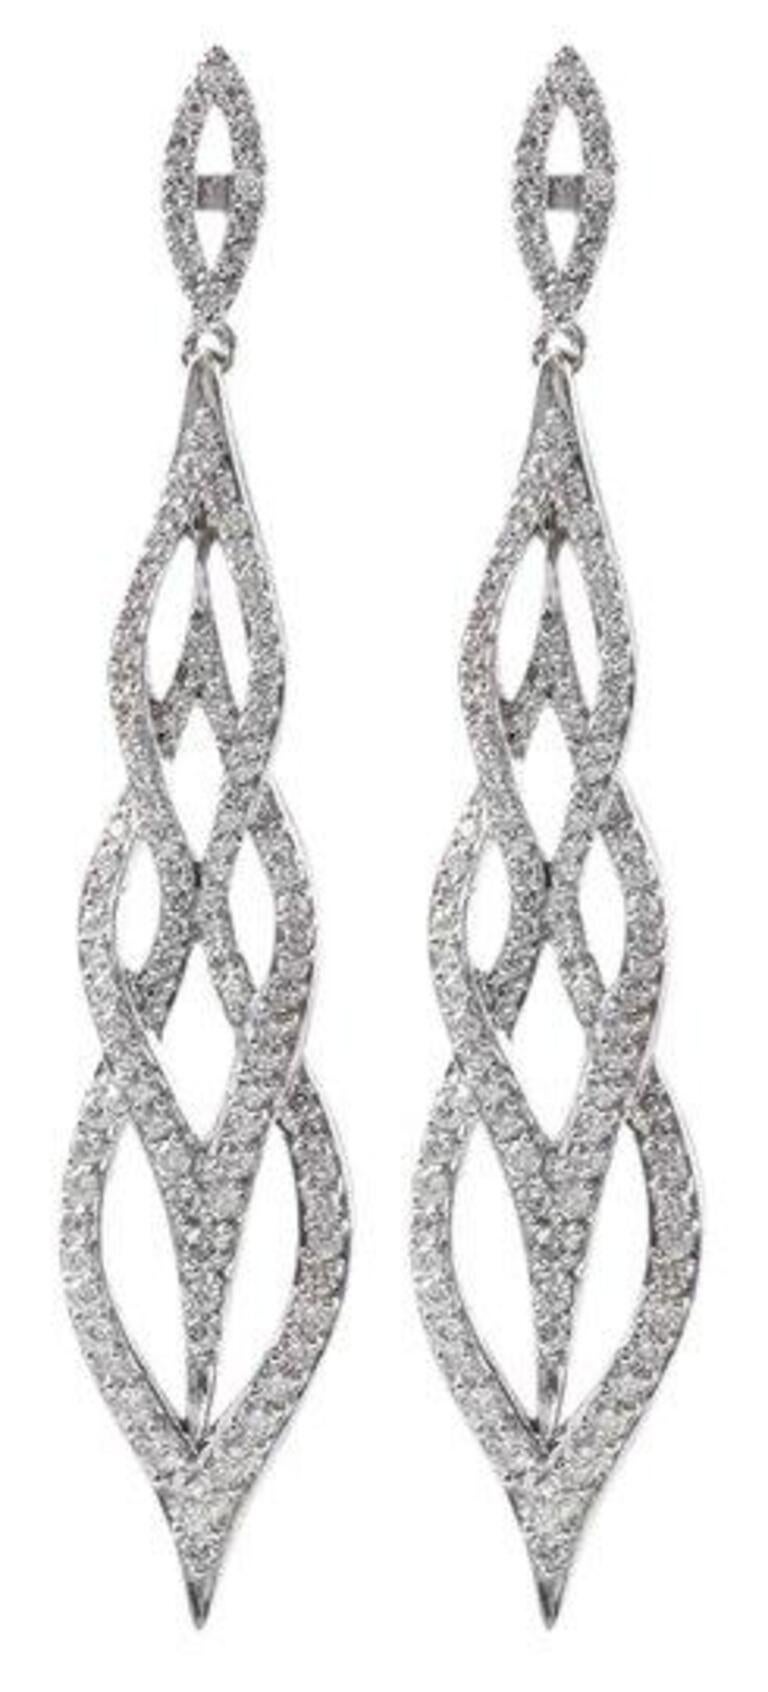 Exquisite 2.62 Carat Natural Diamond 18 Karat Solid White Gold Earrings For Sale 2